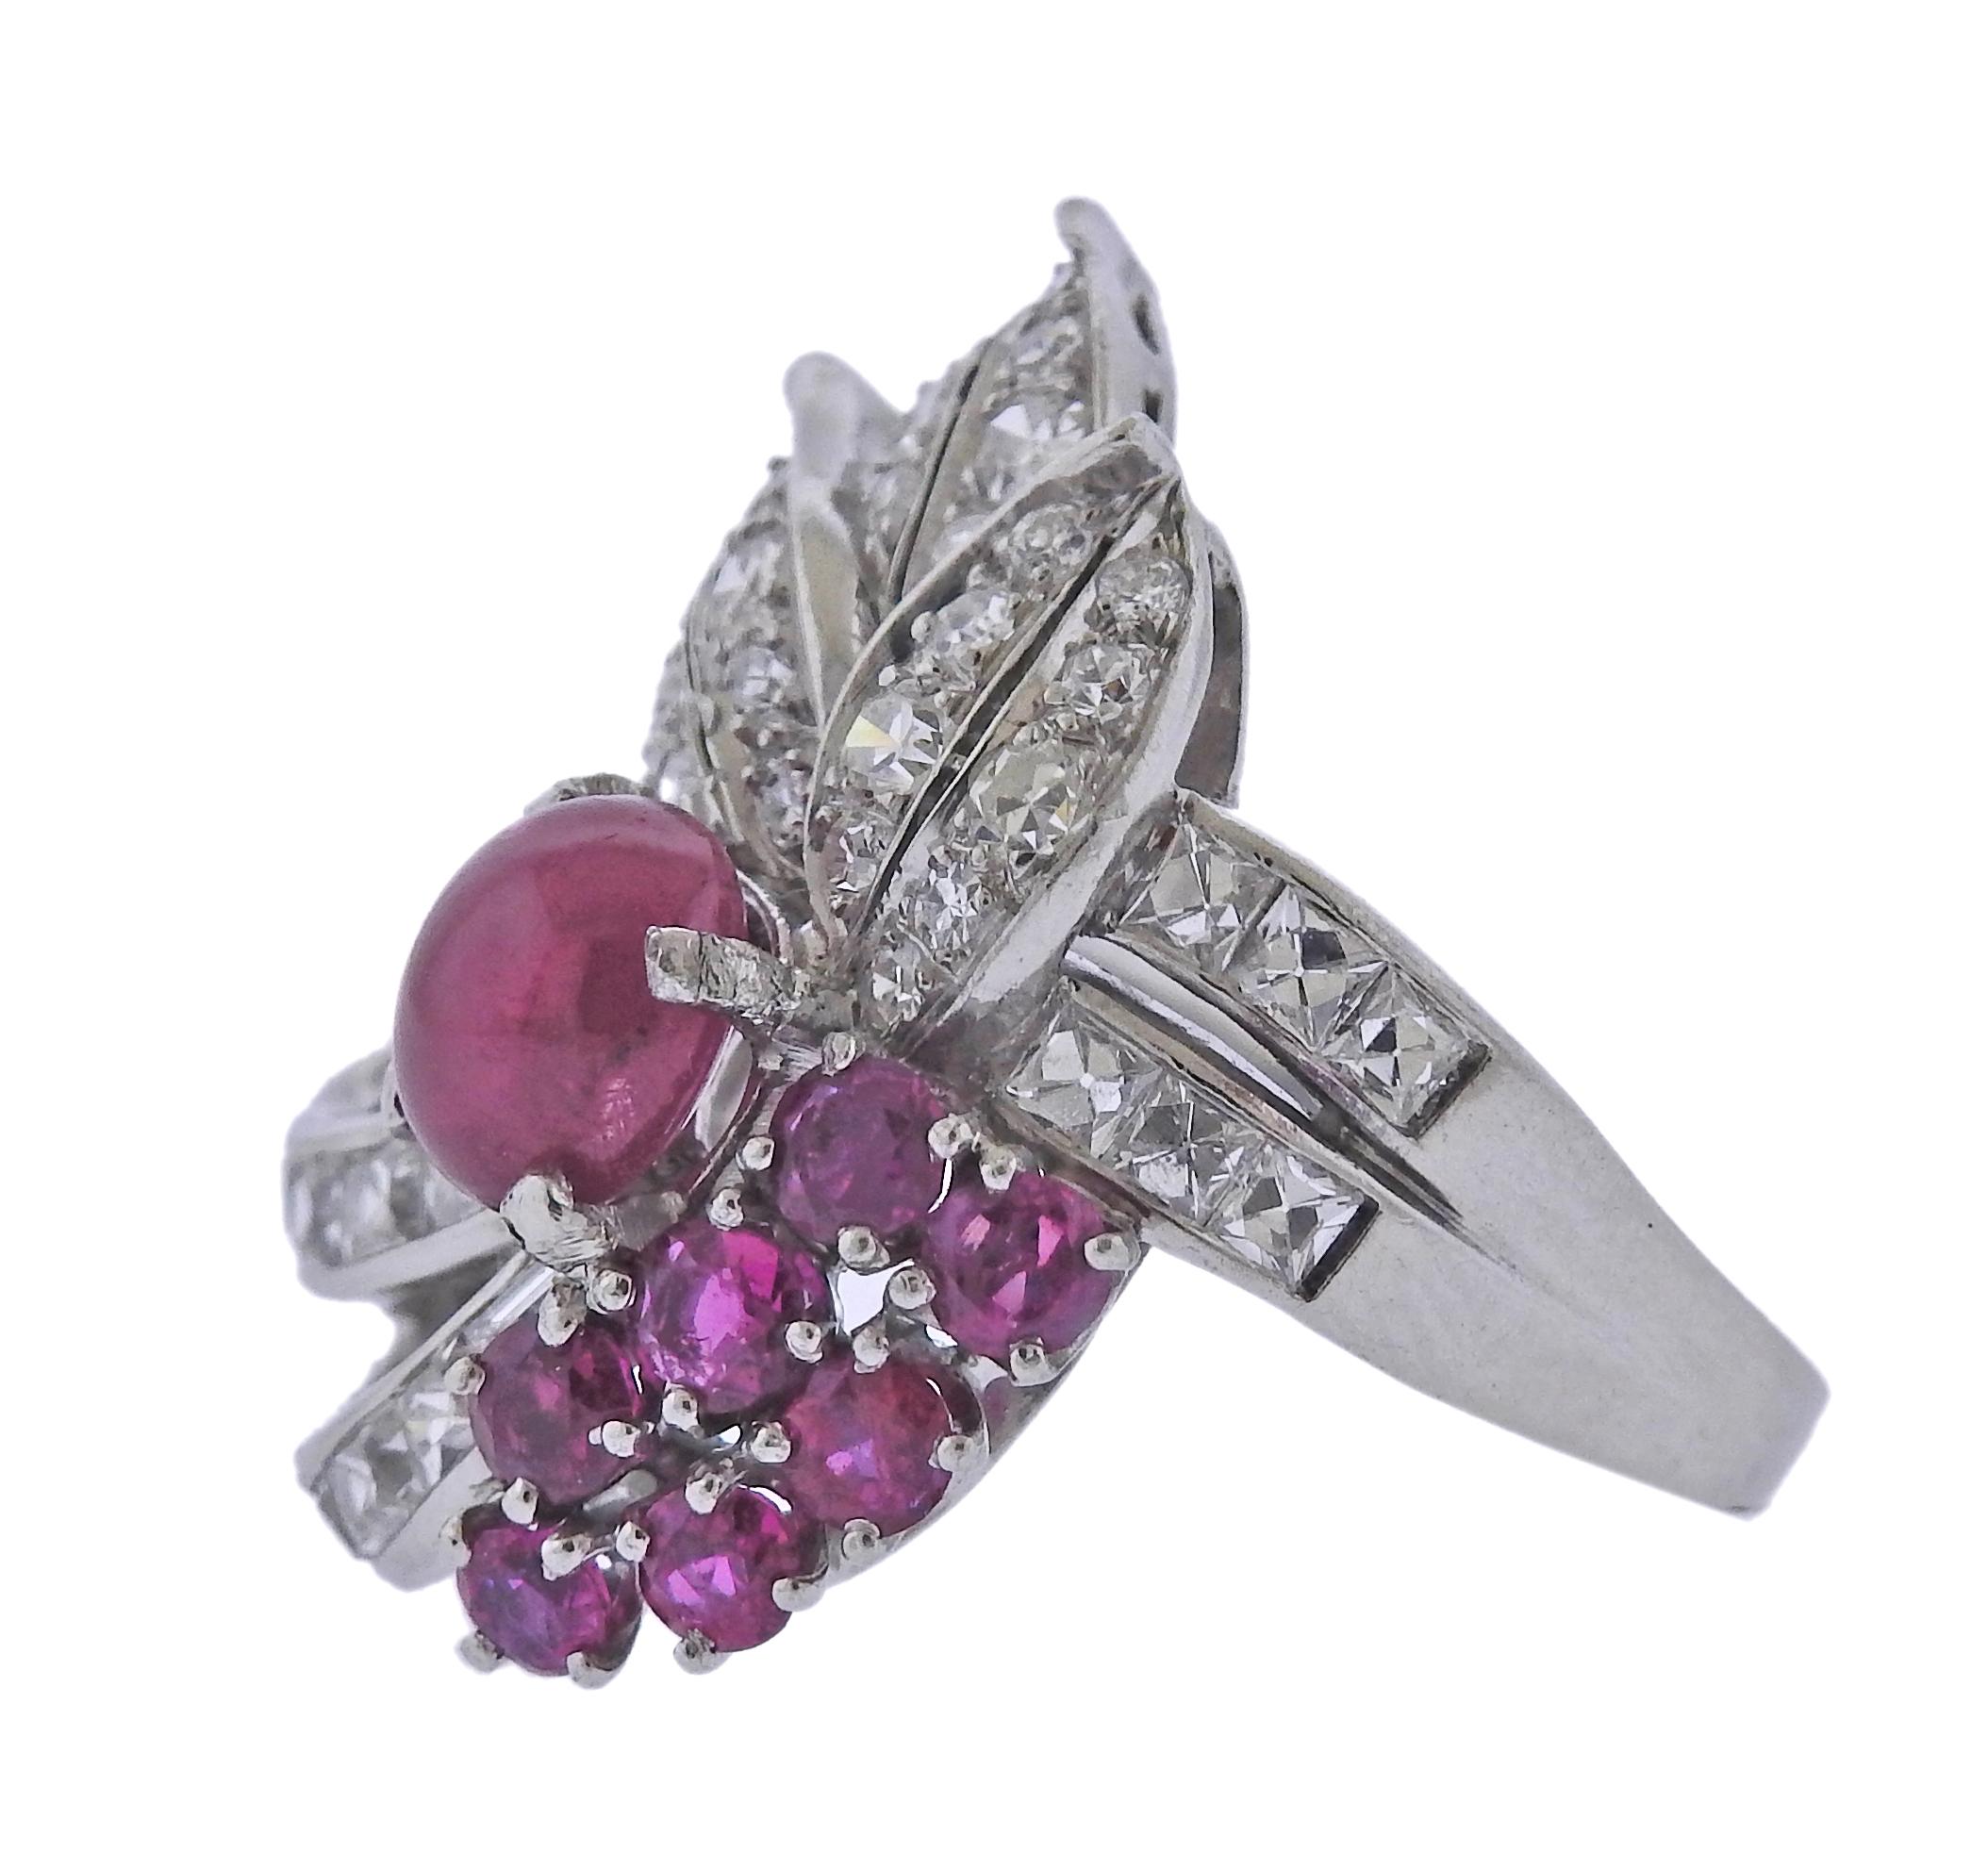 Mid Century platinum cocktail ring, with center ruby cabochon, side rubies and approx. 1.00ctw in diamonds. Ring size - 6.25, ring top - 26mm x 22mm. Tested plat. Weight - 13.3 grams.